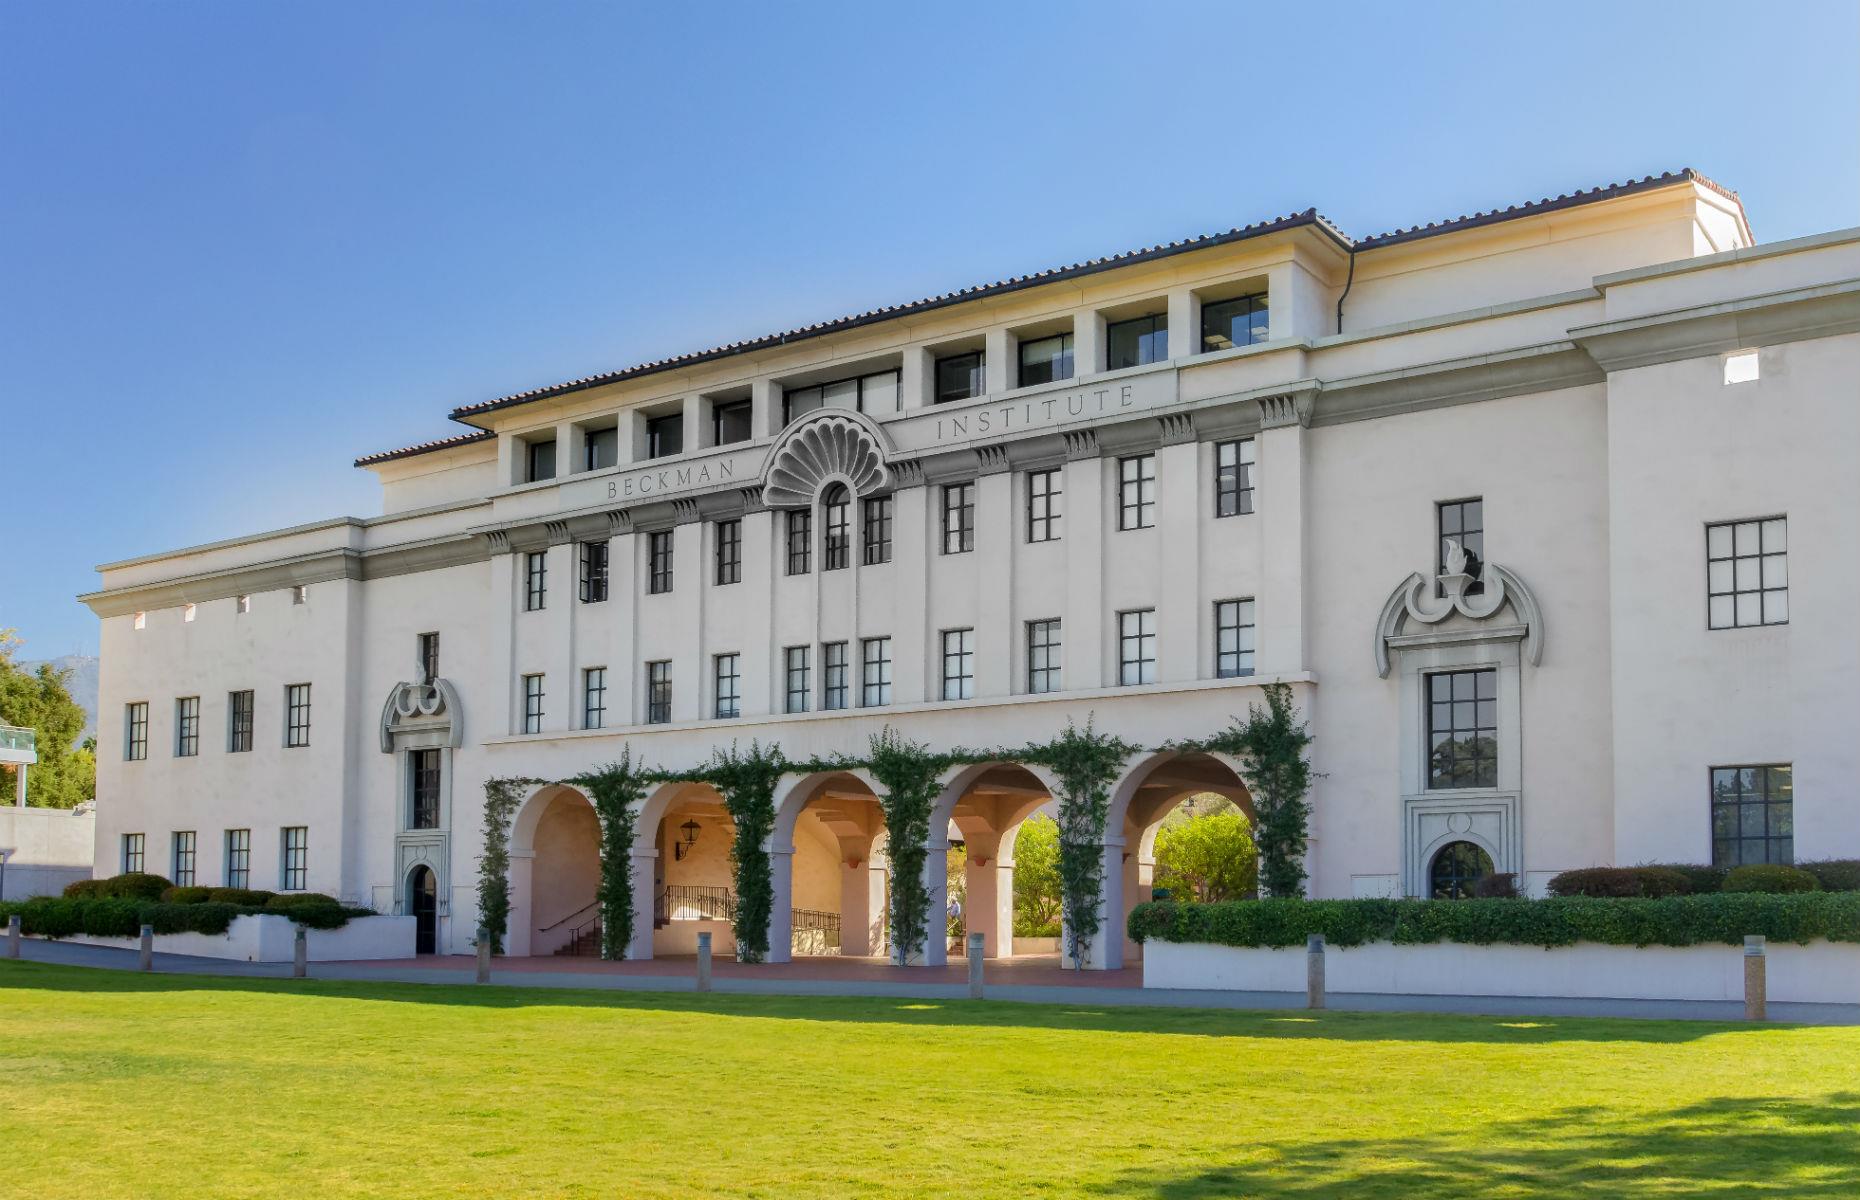 10th – California Institute of Technology, US